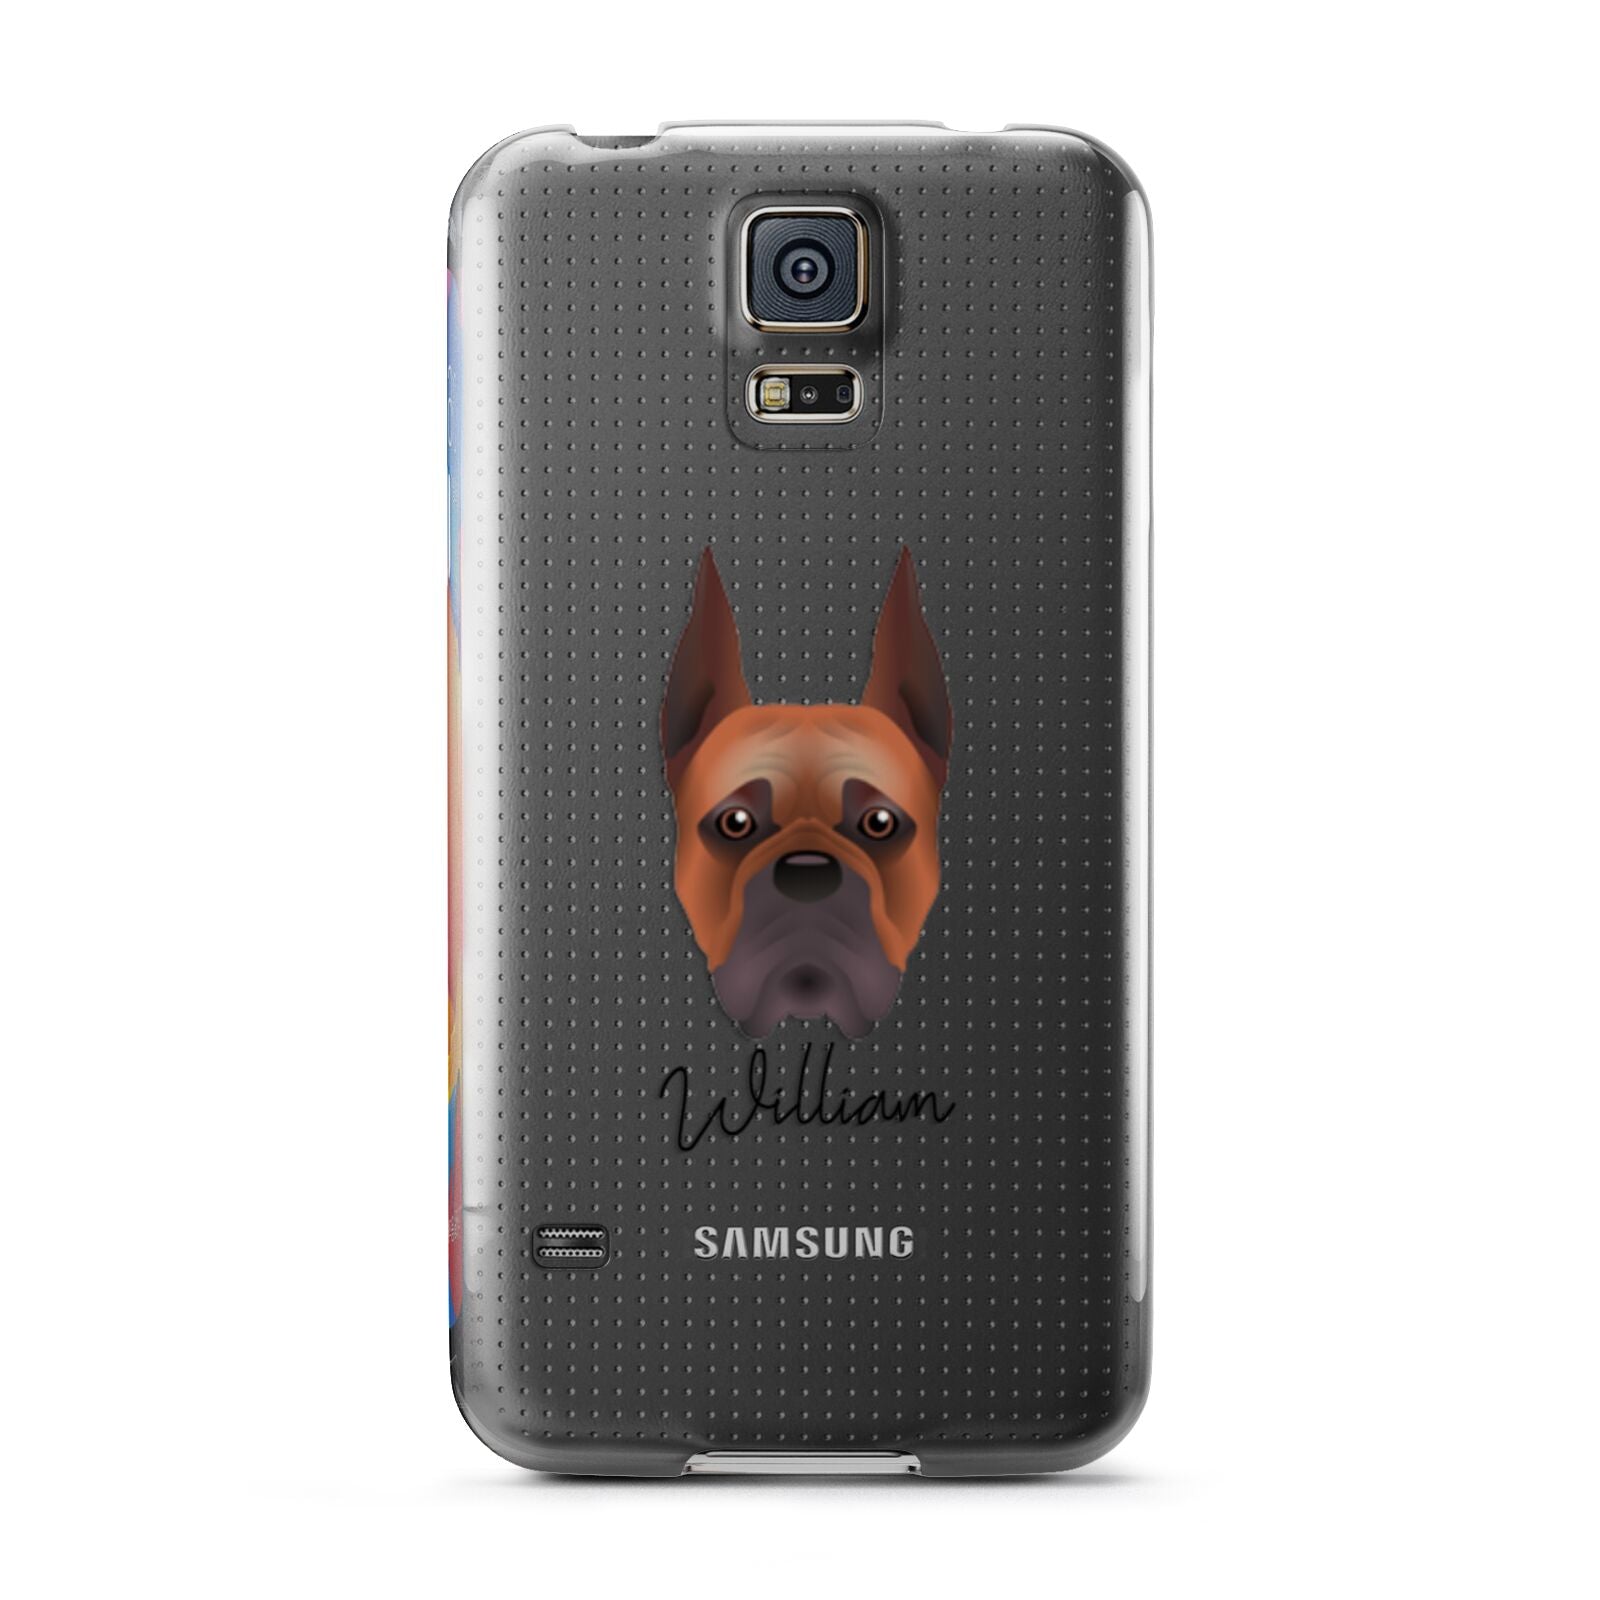 Boxer Personalised Samsung Galaxy S5 Case